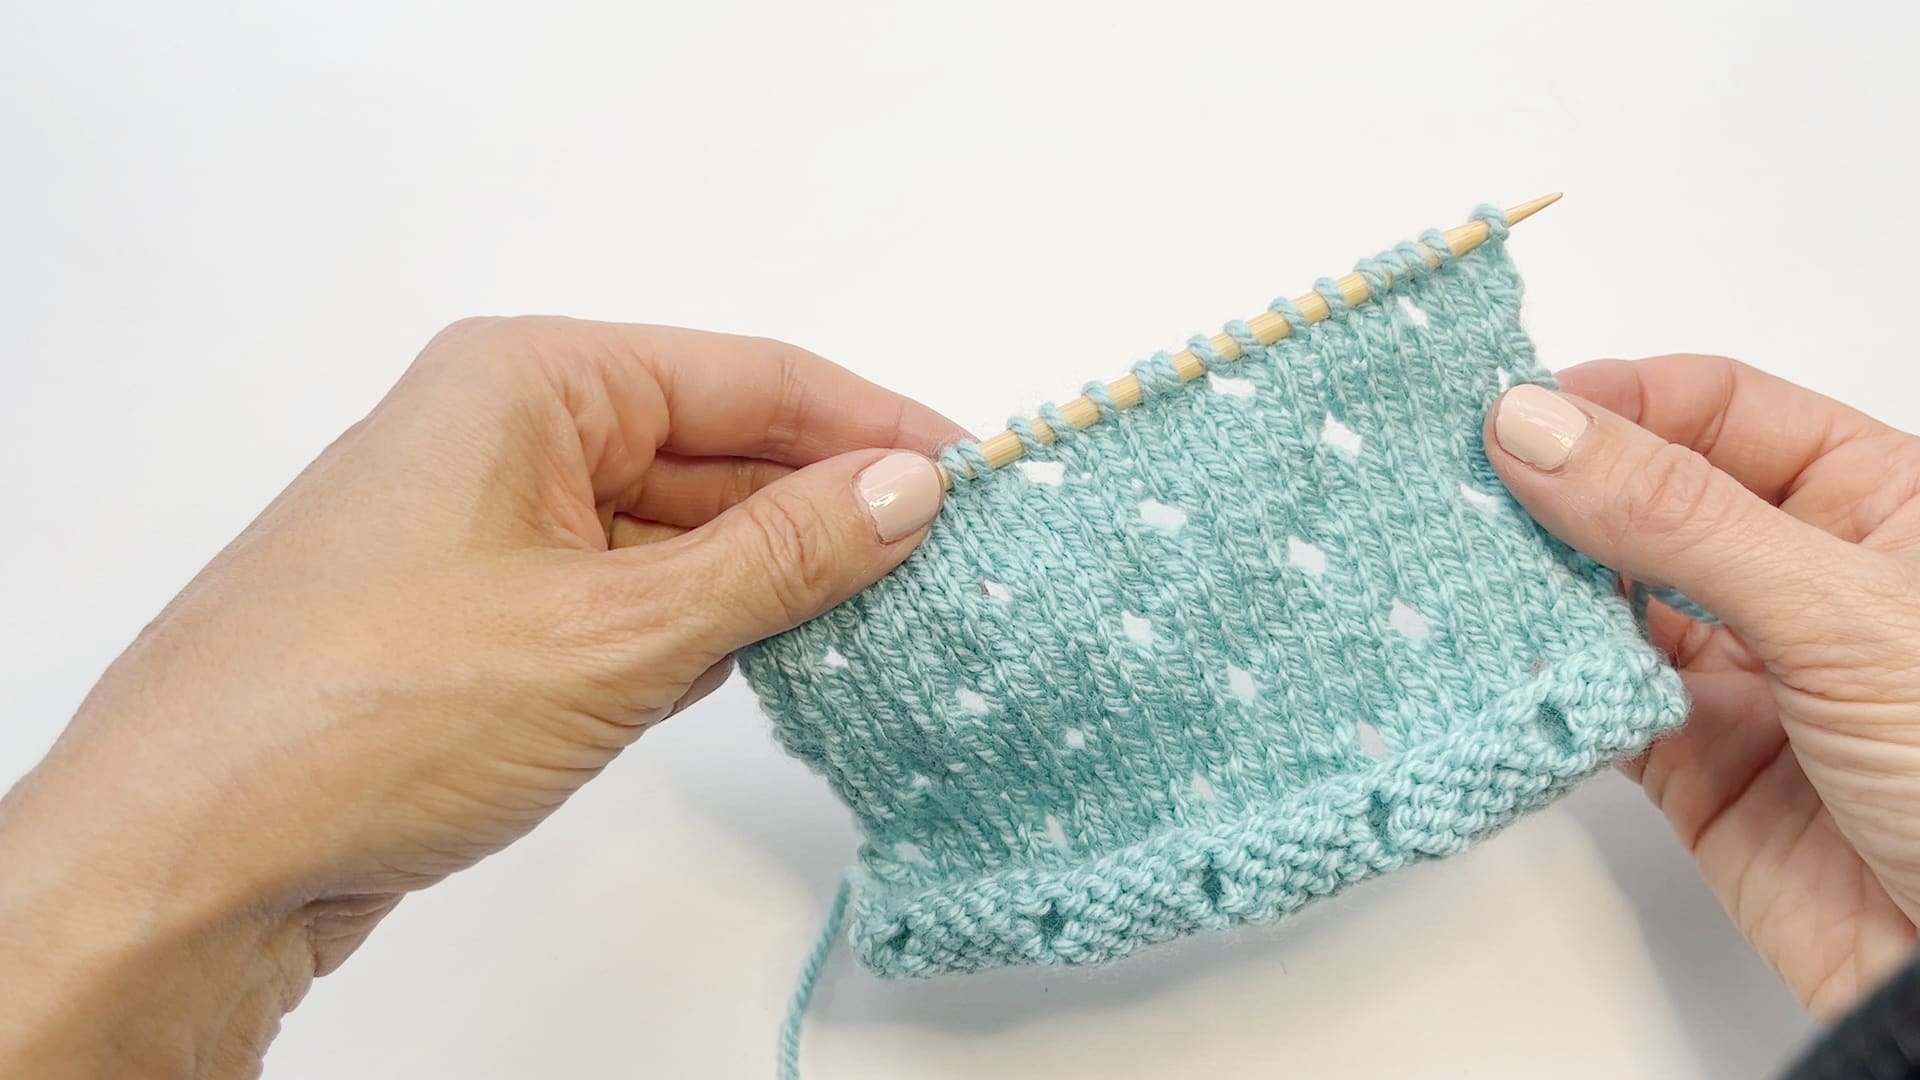 Basic Eyelet Stitch Knitting Pattern: Easy How To for Beginners - Little  Red Window